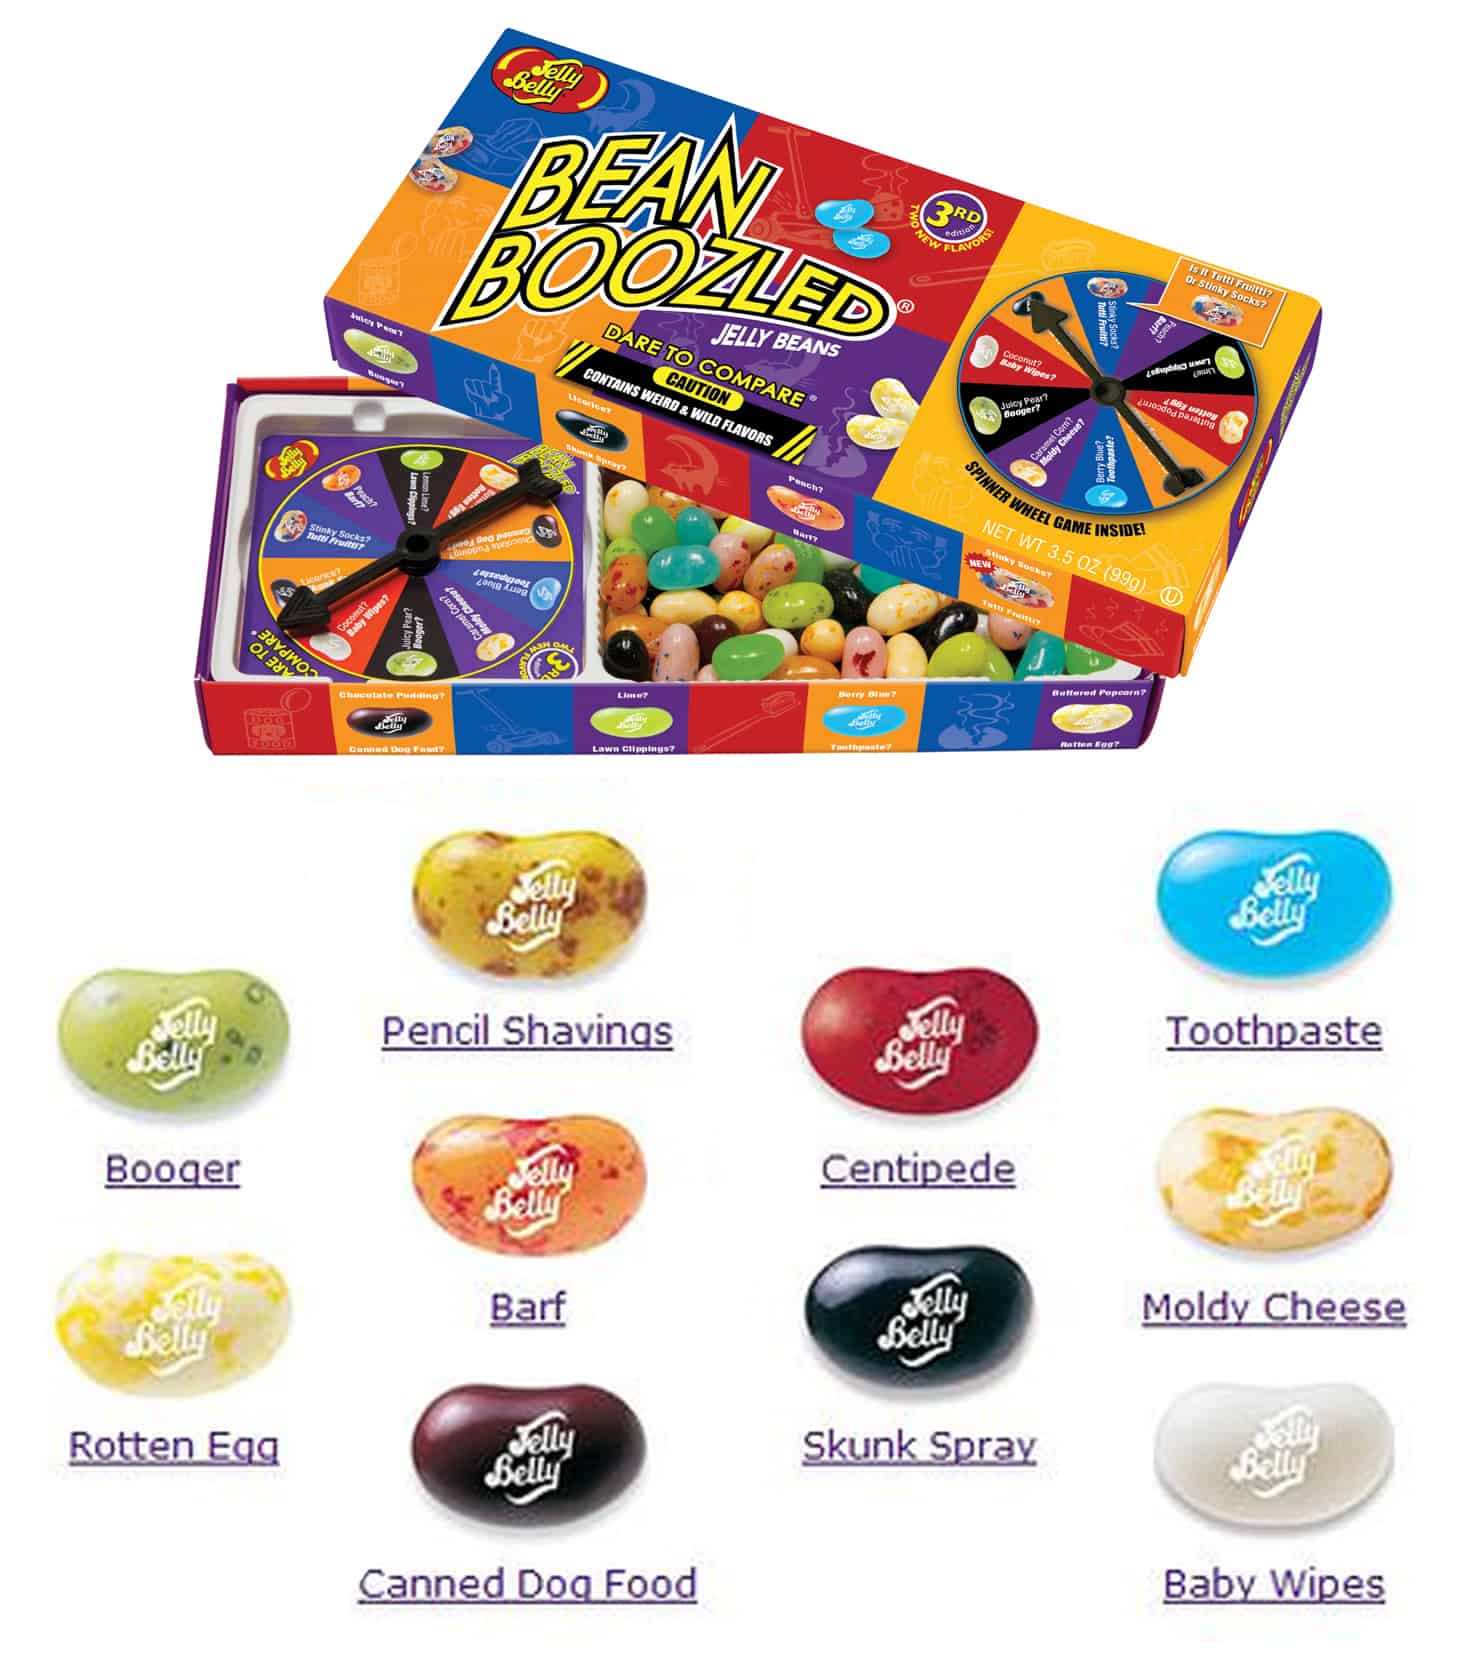 Jelly Beans Spiel